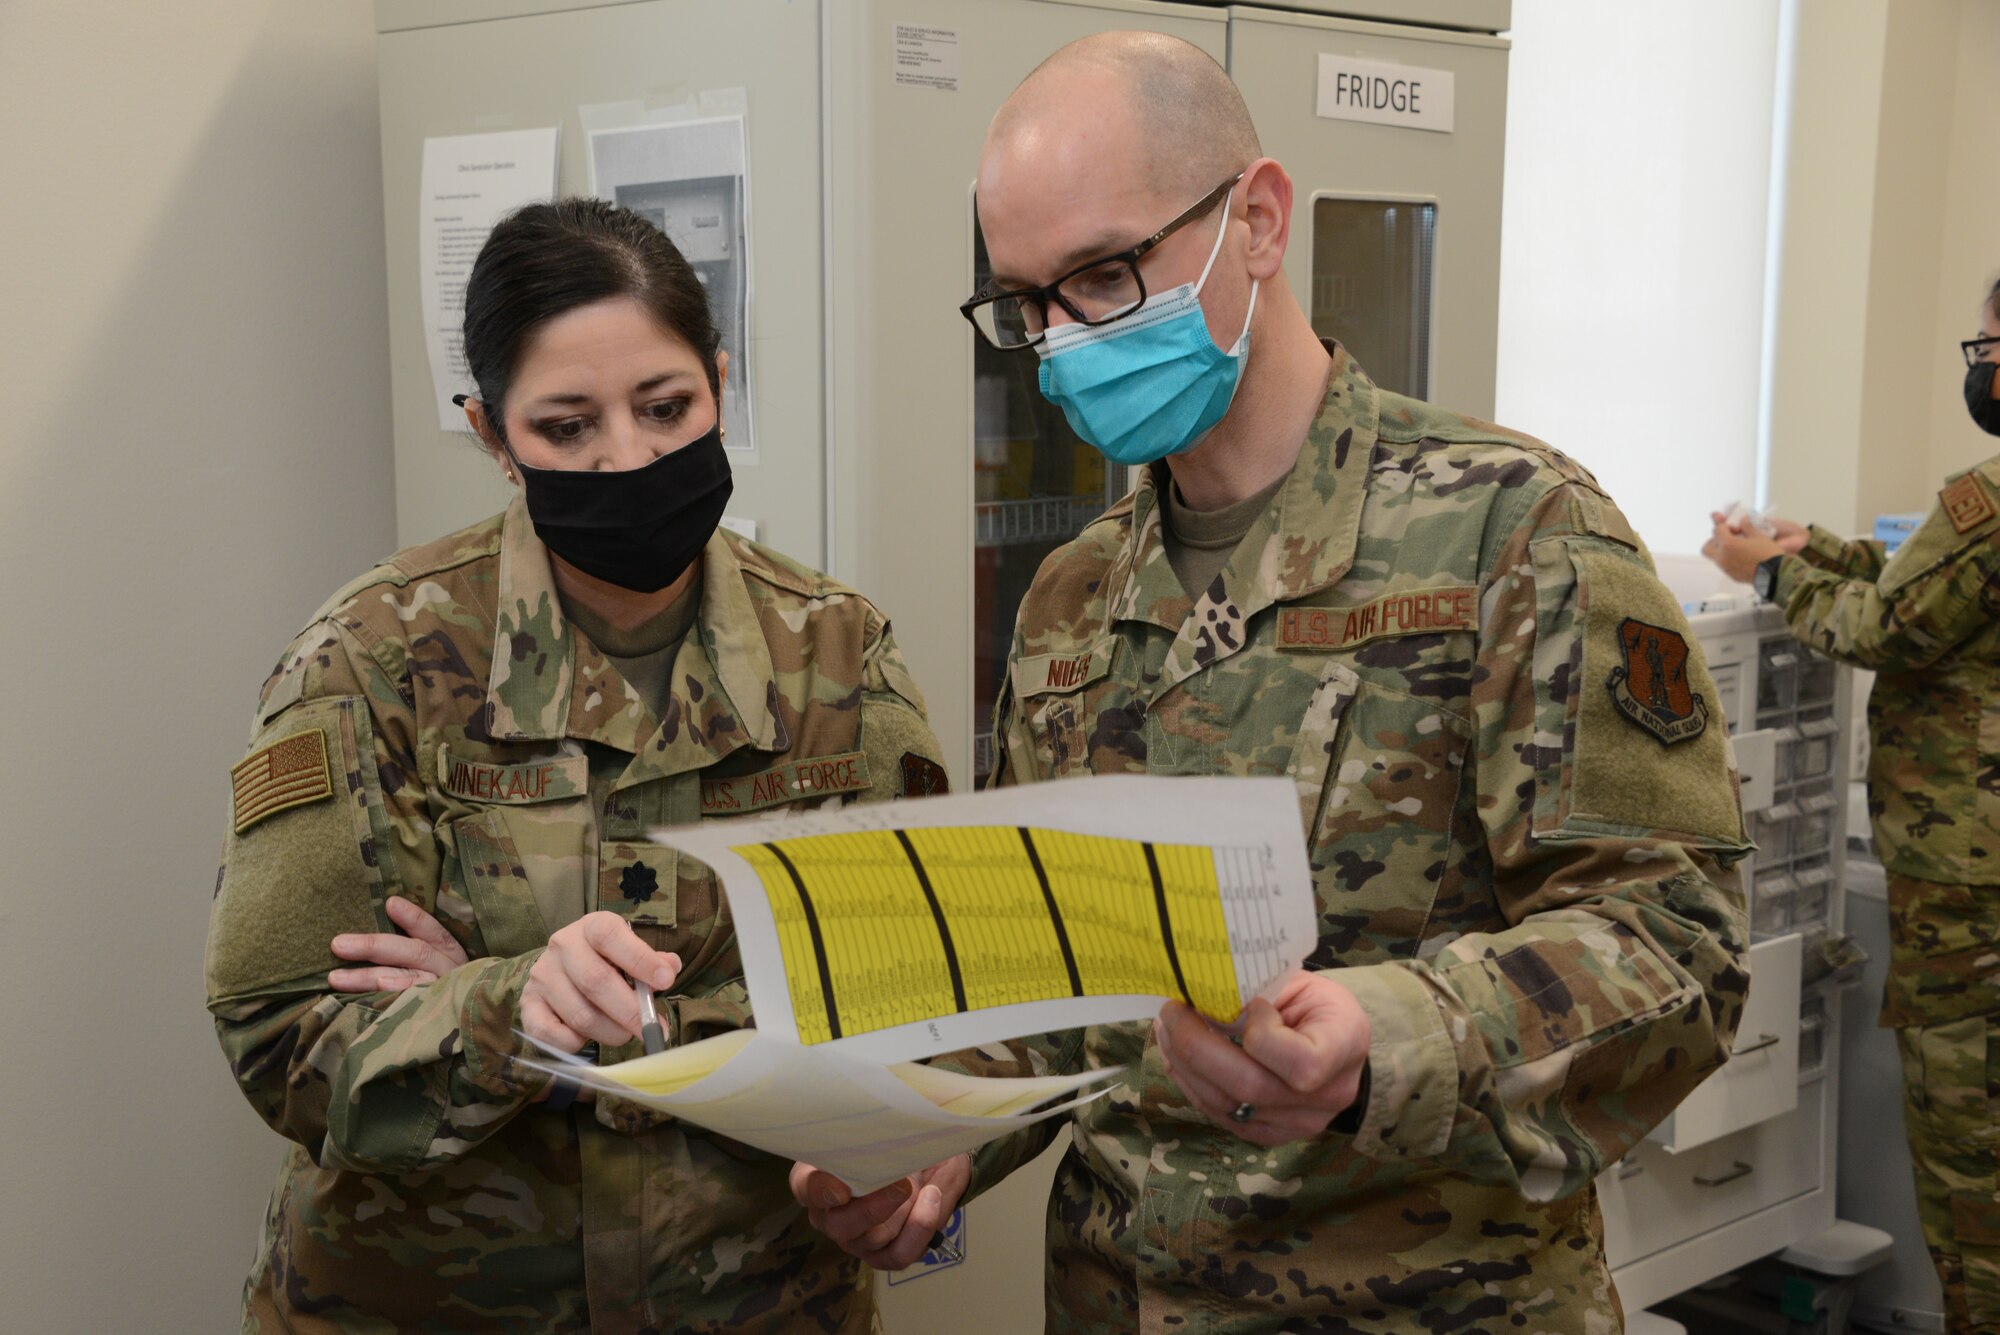 Lt. Col. Tonja Winekauf and Capt. Paul Niles look over a list of patients who are scheduled to receive COVID vaccinations.